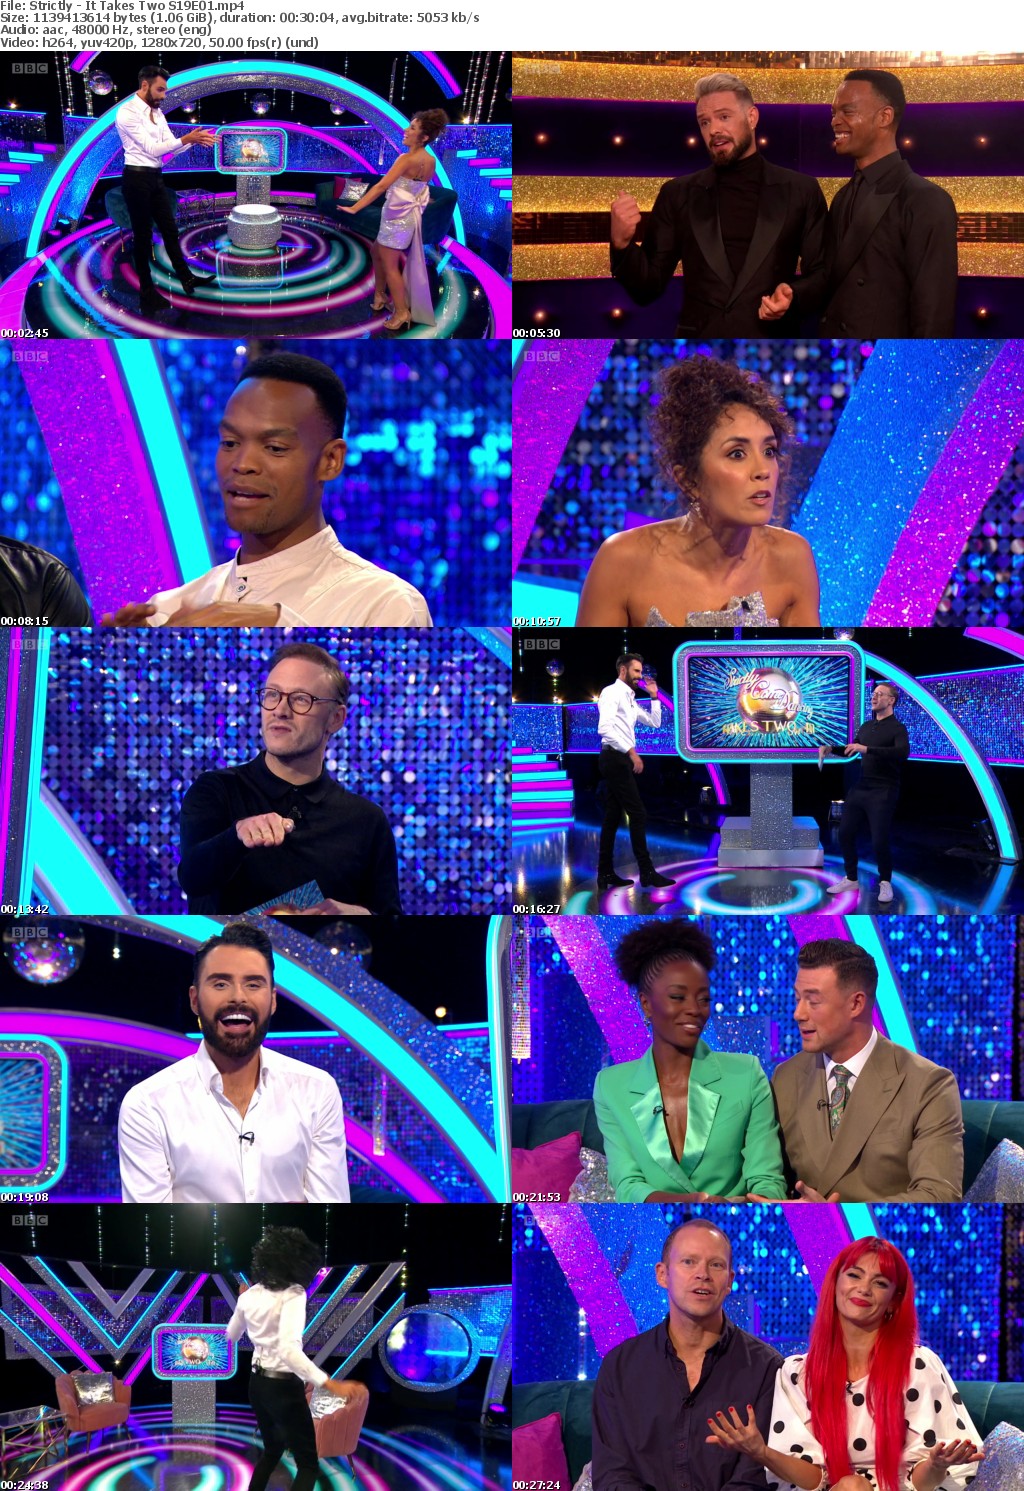 Strictly - It Takes Two S19E01 (1280x720p HD, 50fps, soft Eng subs)